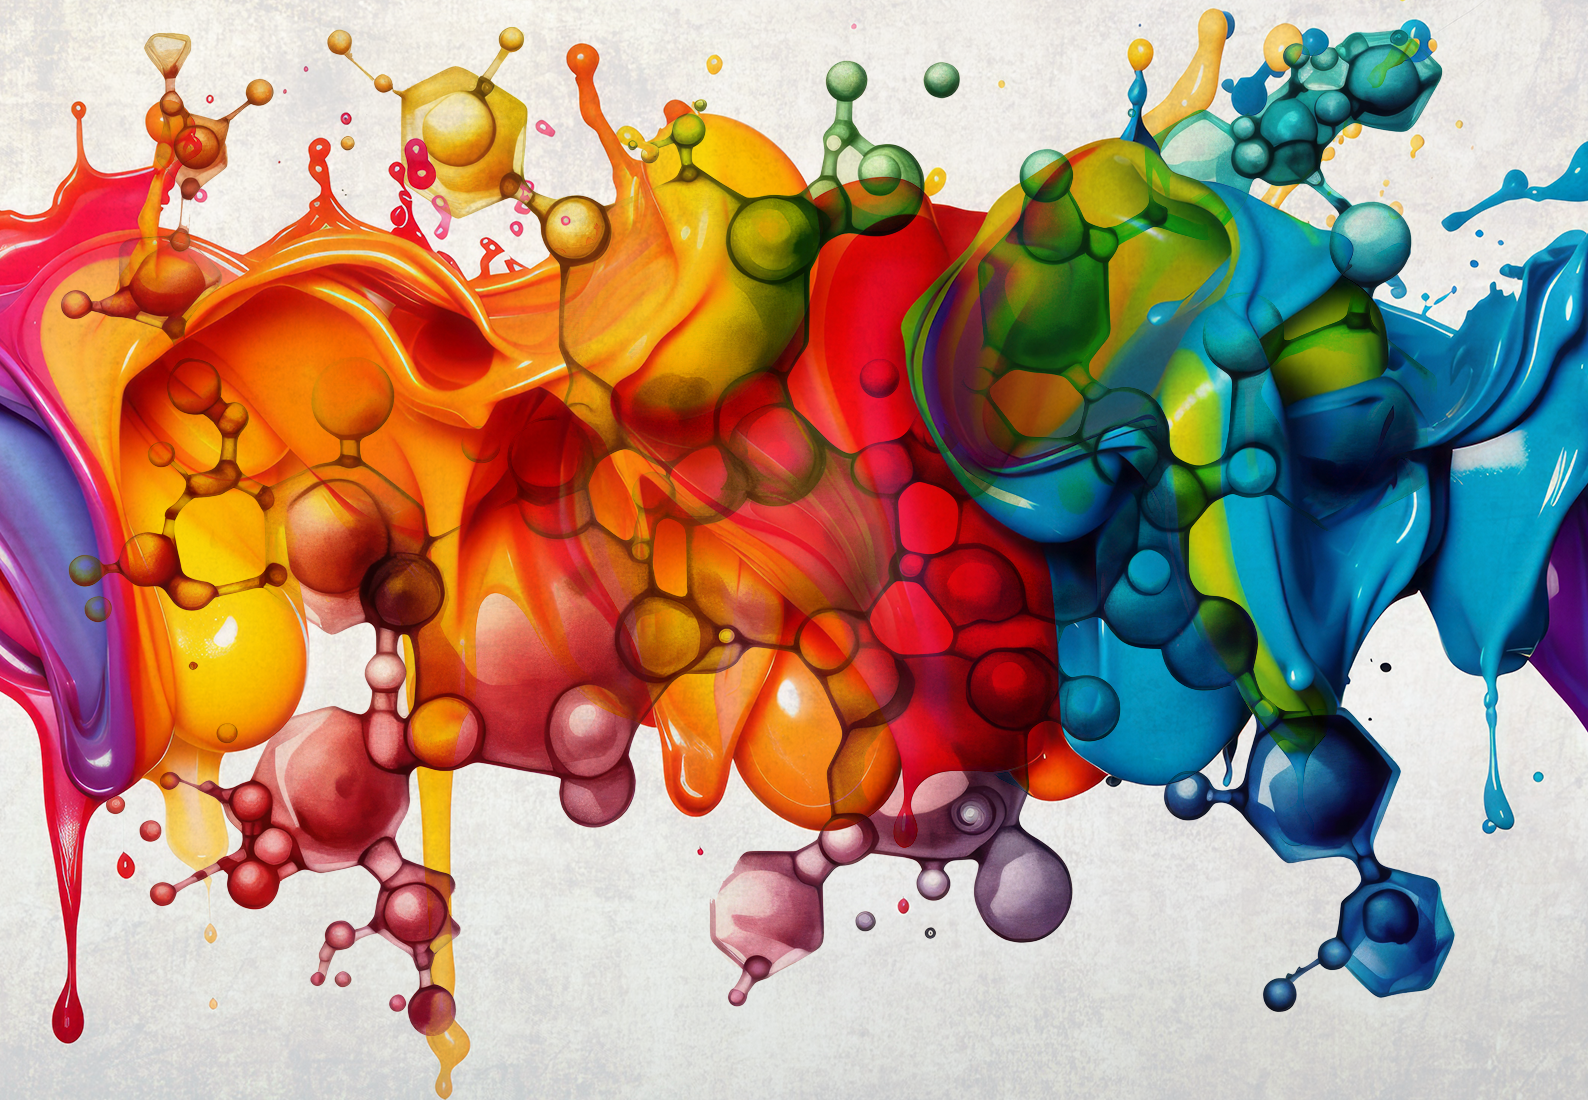 Image depicts polymer molecules covered in rainbow paint.